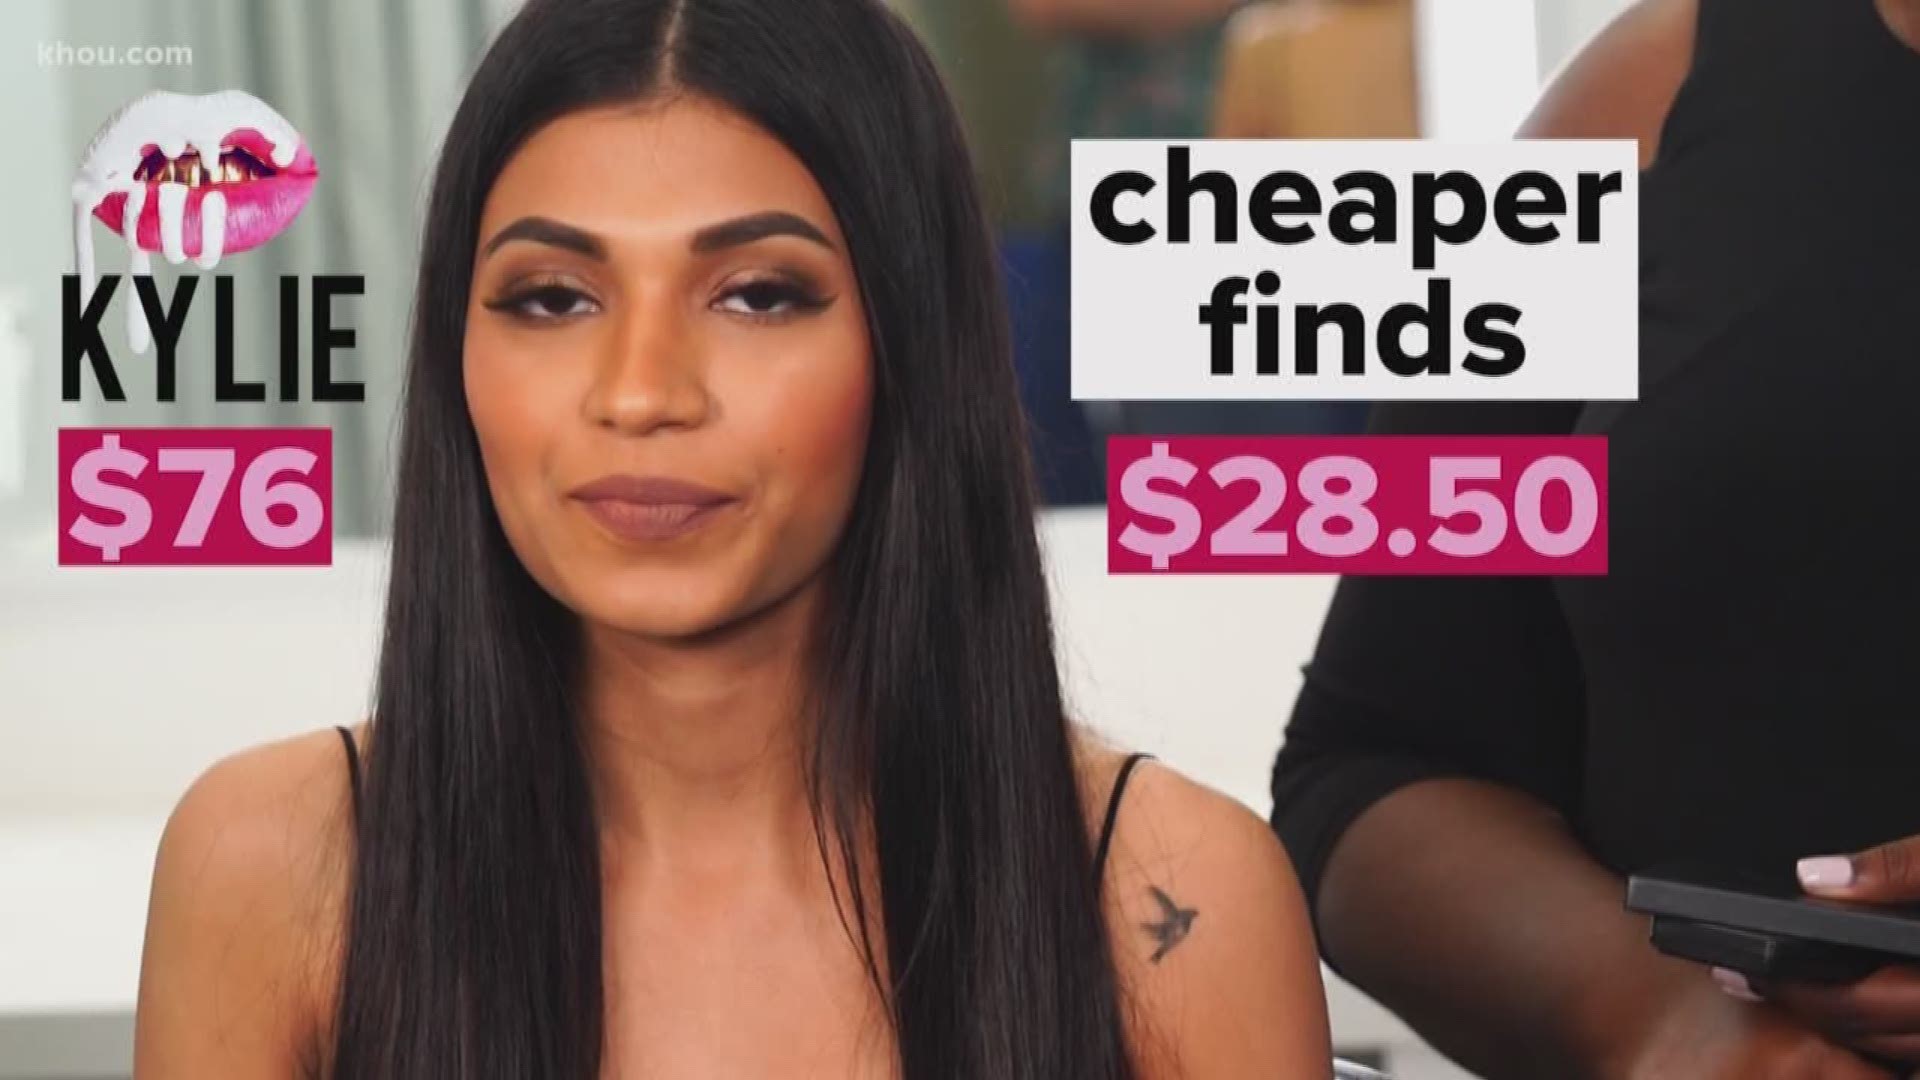 KHOU Consumer Reporter Tiffany Craig shows us which drugstore makeup offers the same look as Kylie Cosmetics.